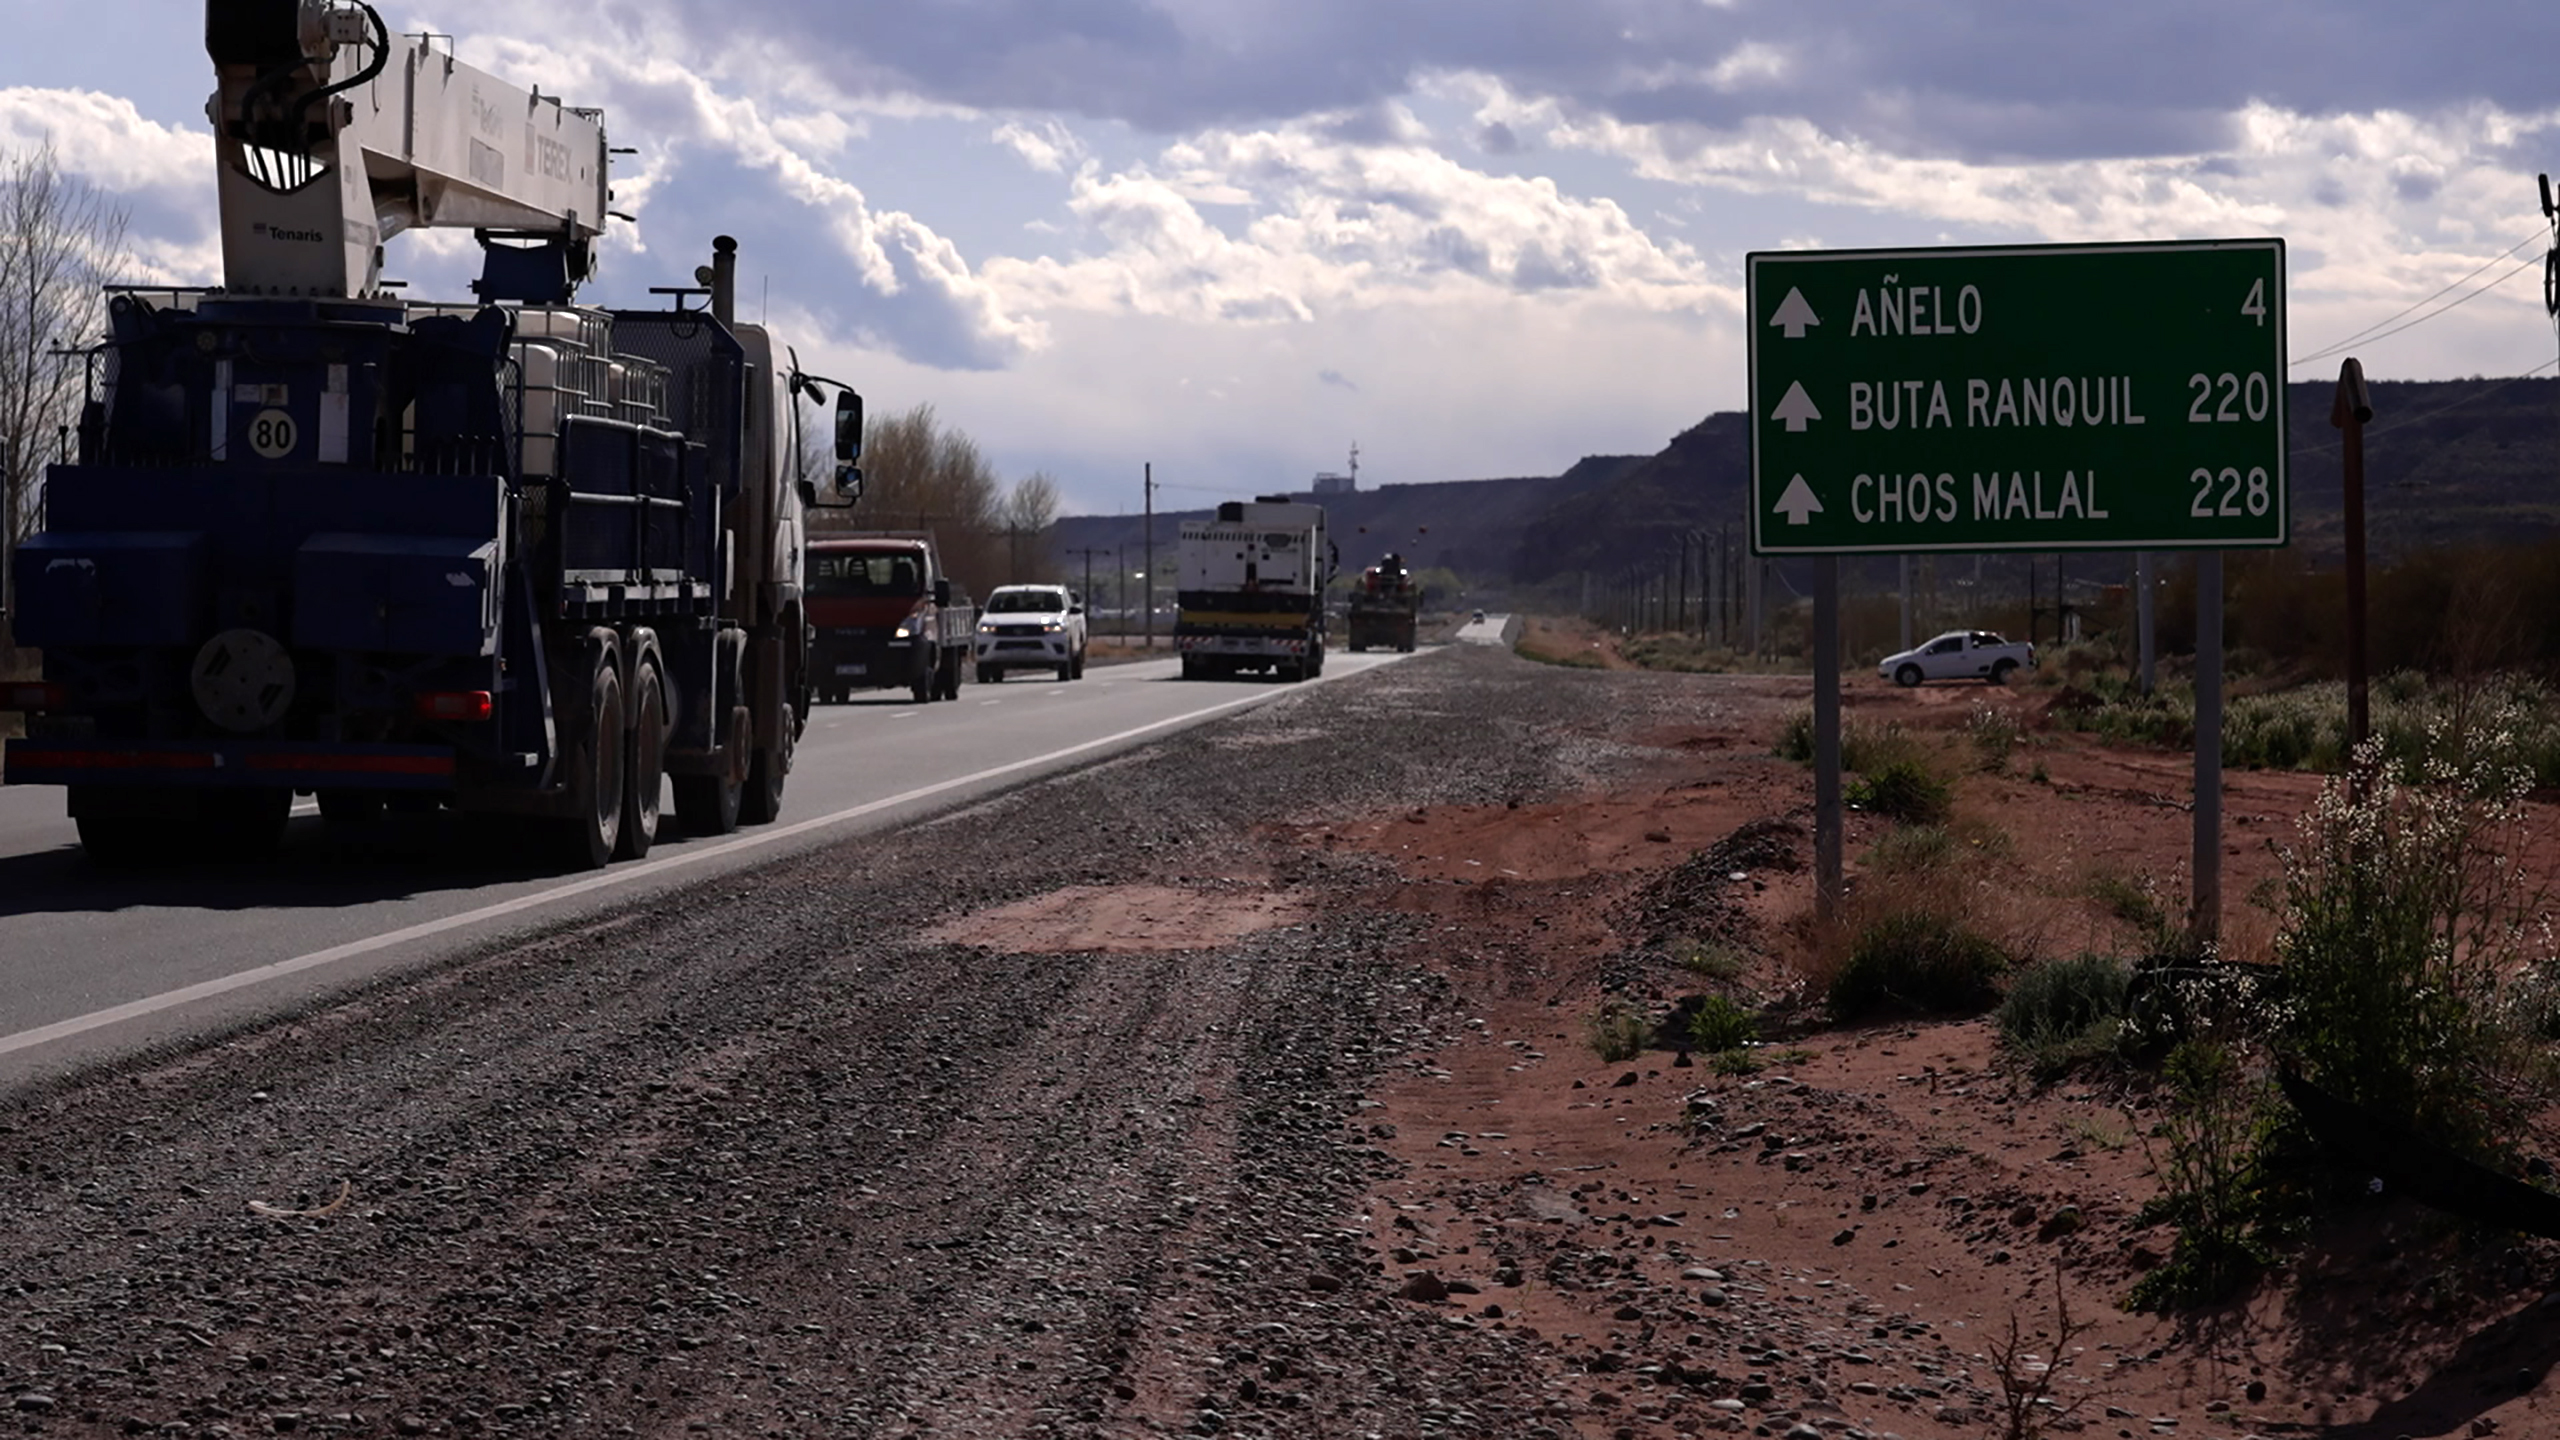 Large trucks facing away drive along a main road to the left, a green road sign to the right shows three places including Anelo, Argentina